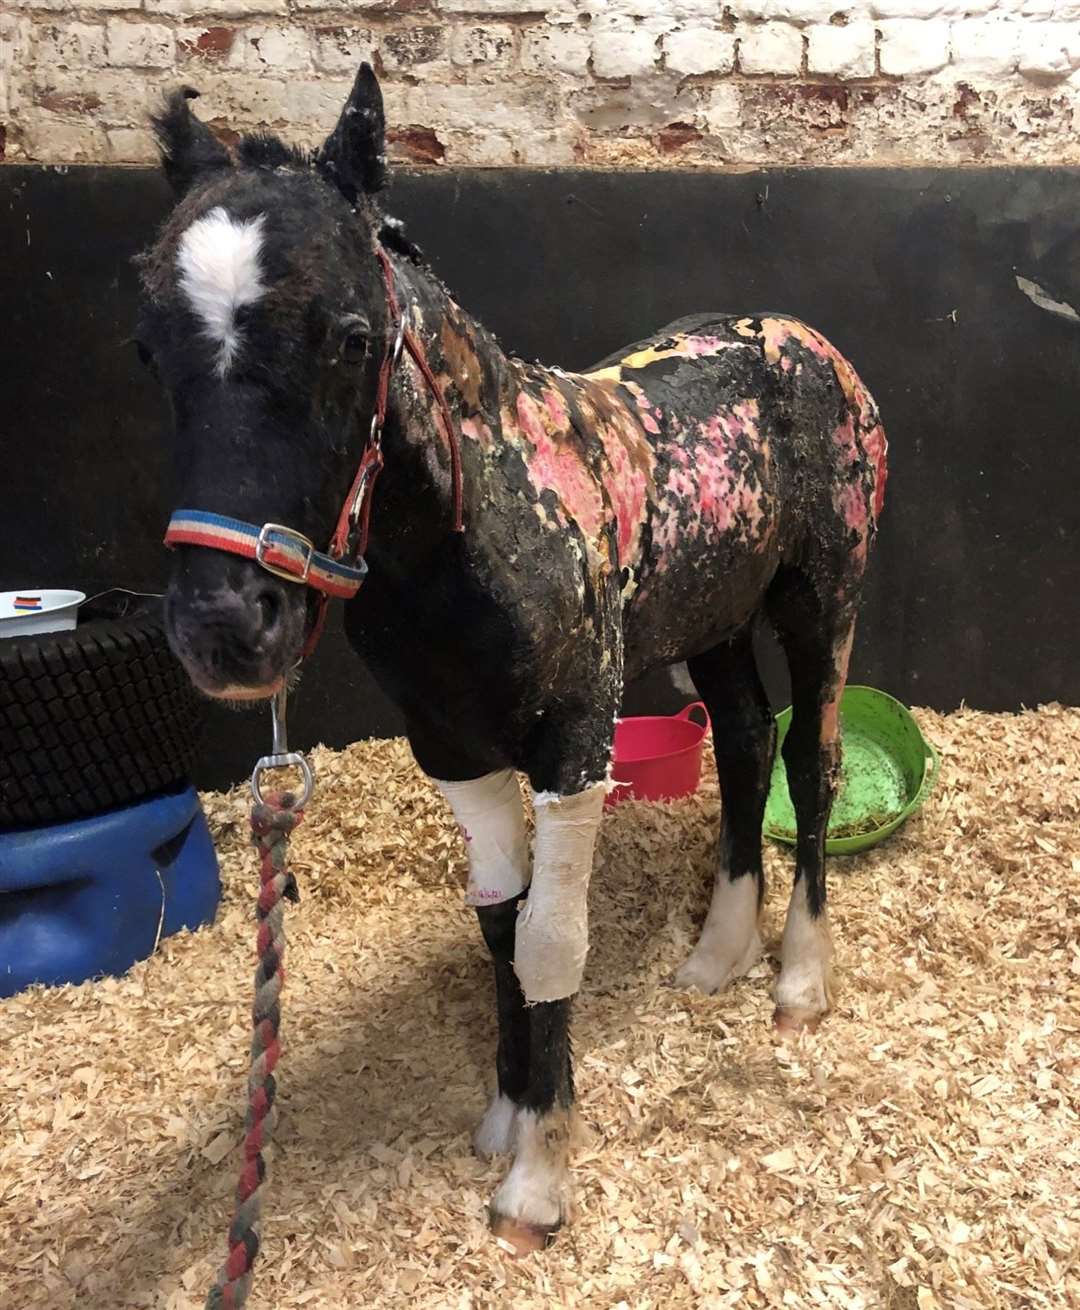 Phoenix with his injuries from the suspected arson attack in Ash, near West Kingsdown